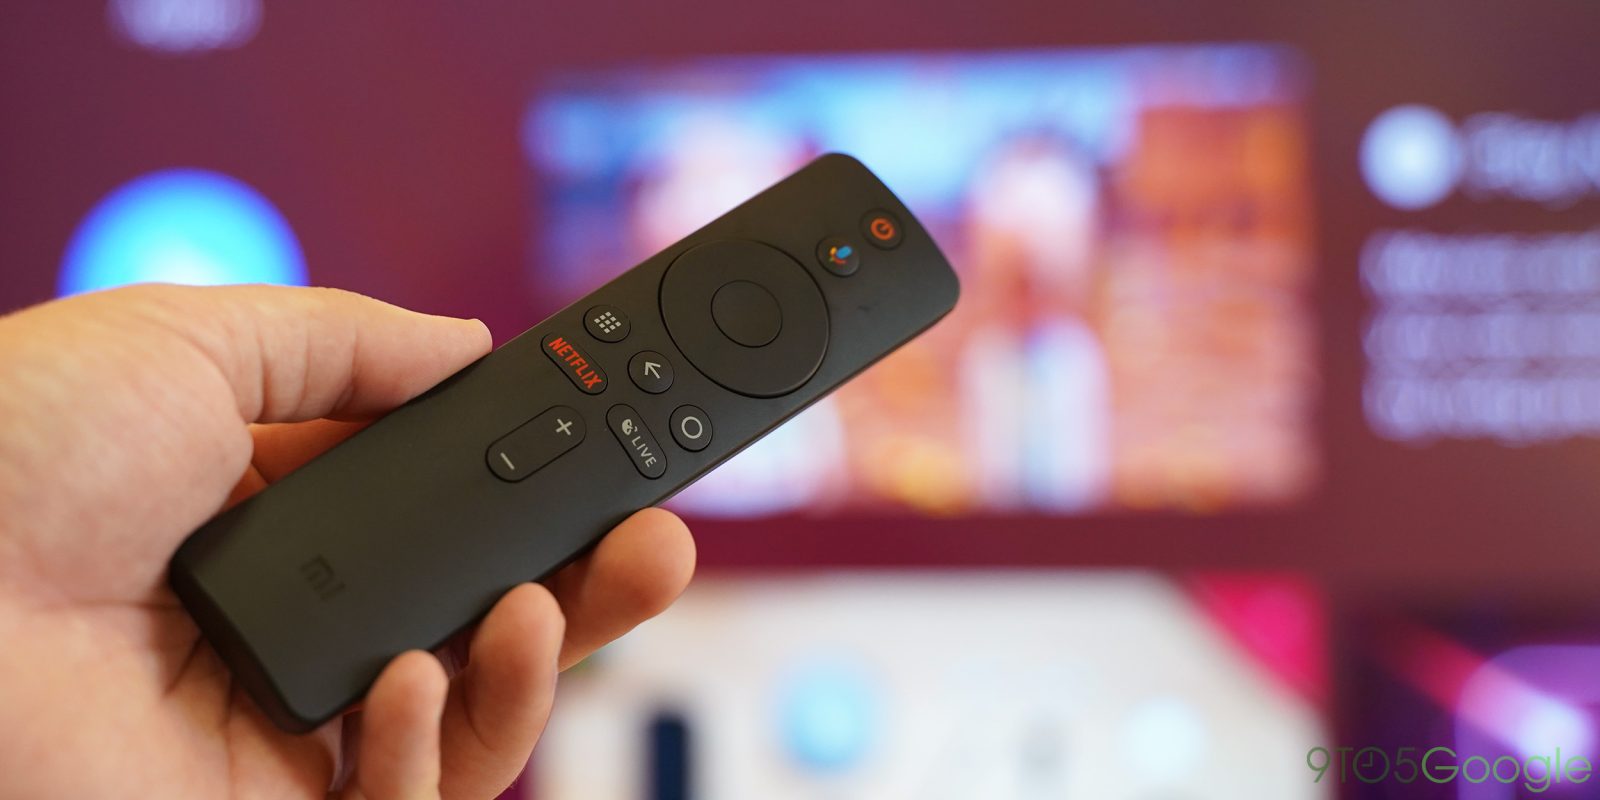 Xiaomi Mi Box S unexpectedly getting Android TV 12 update